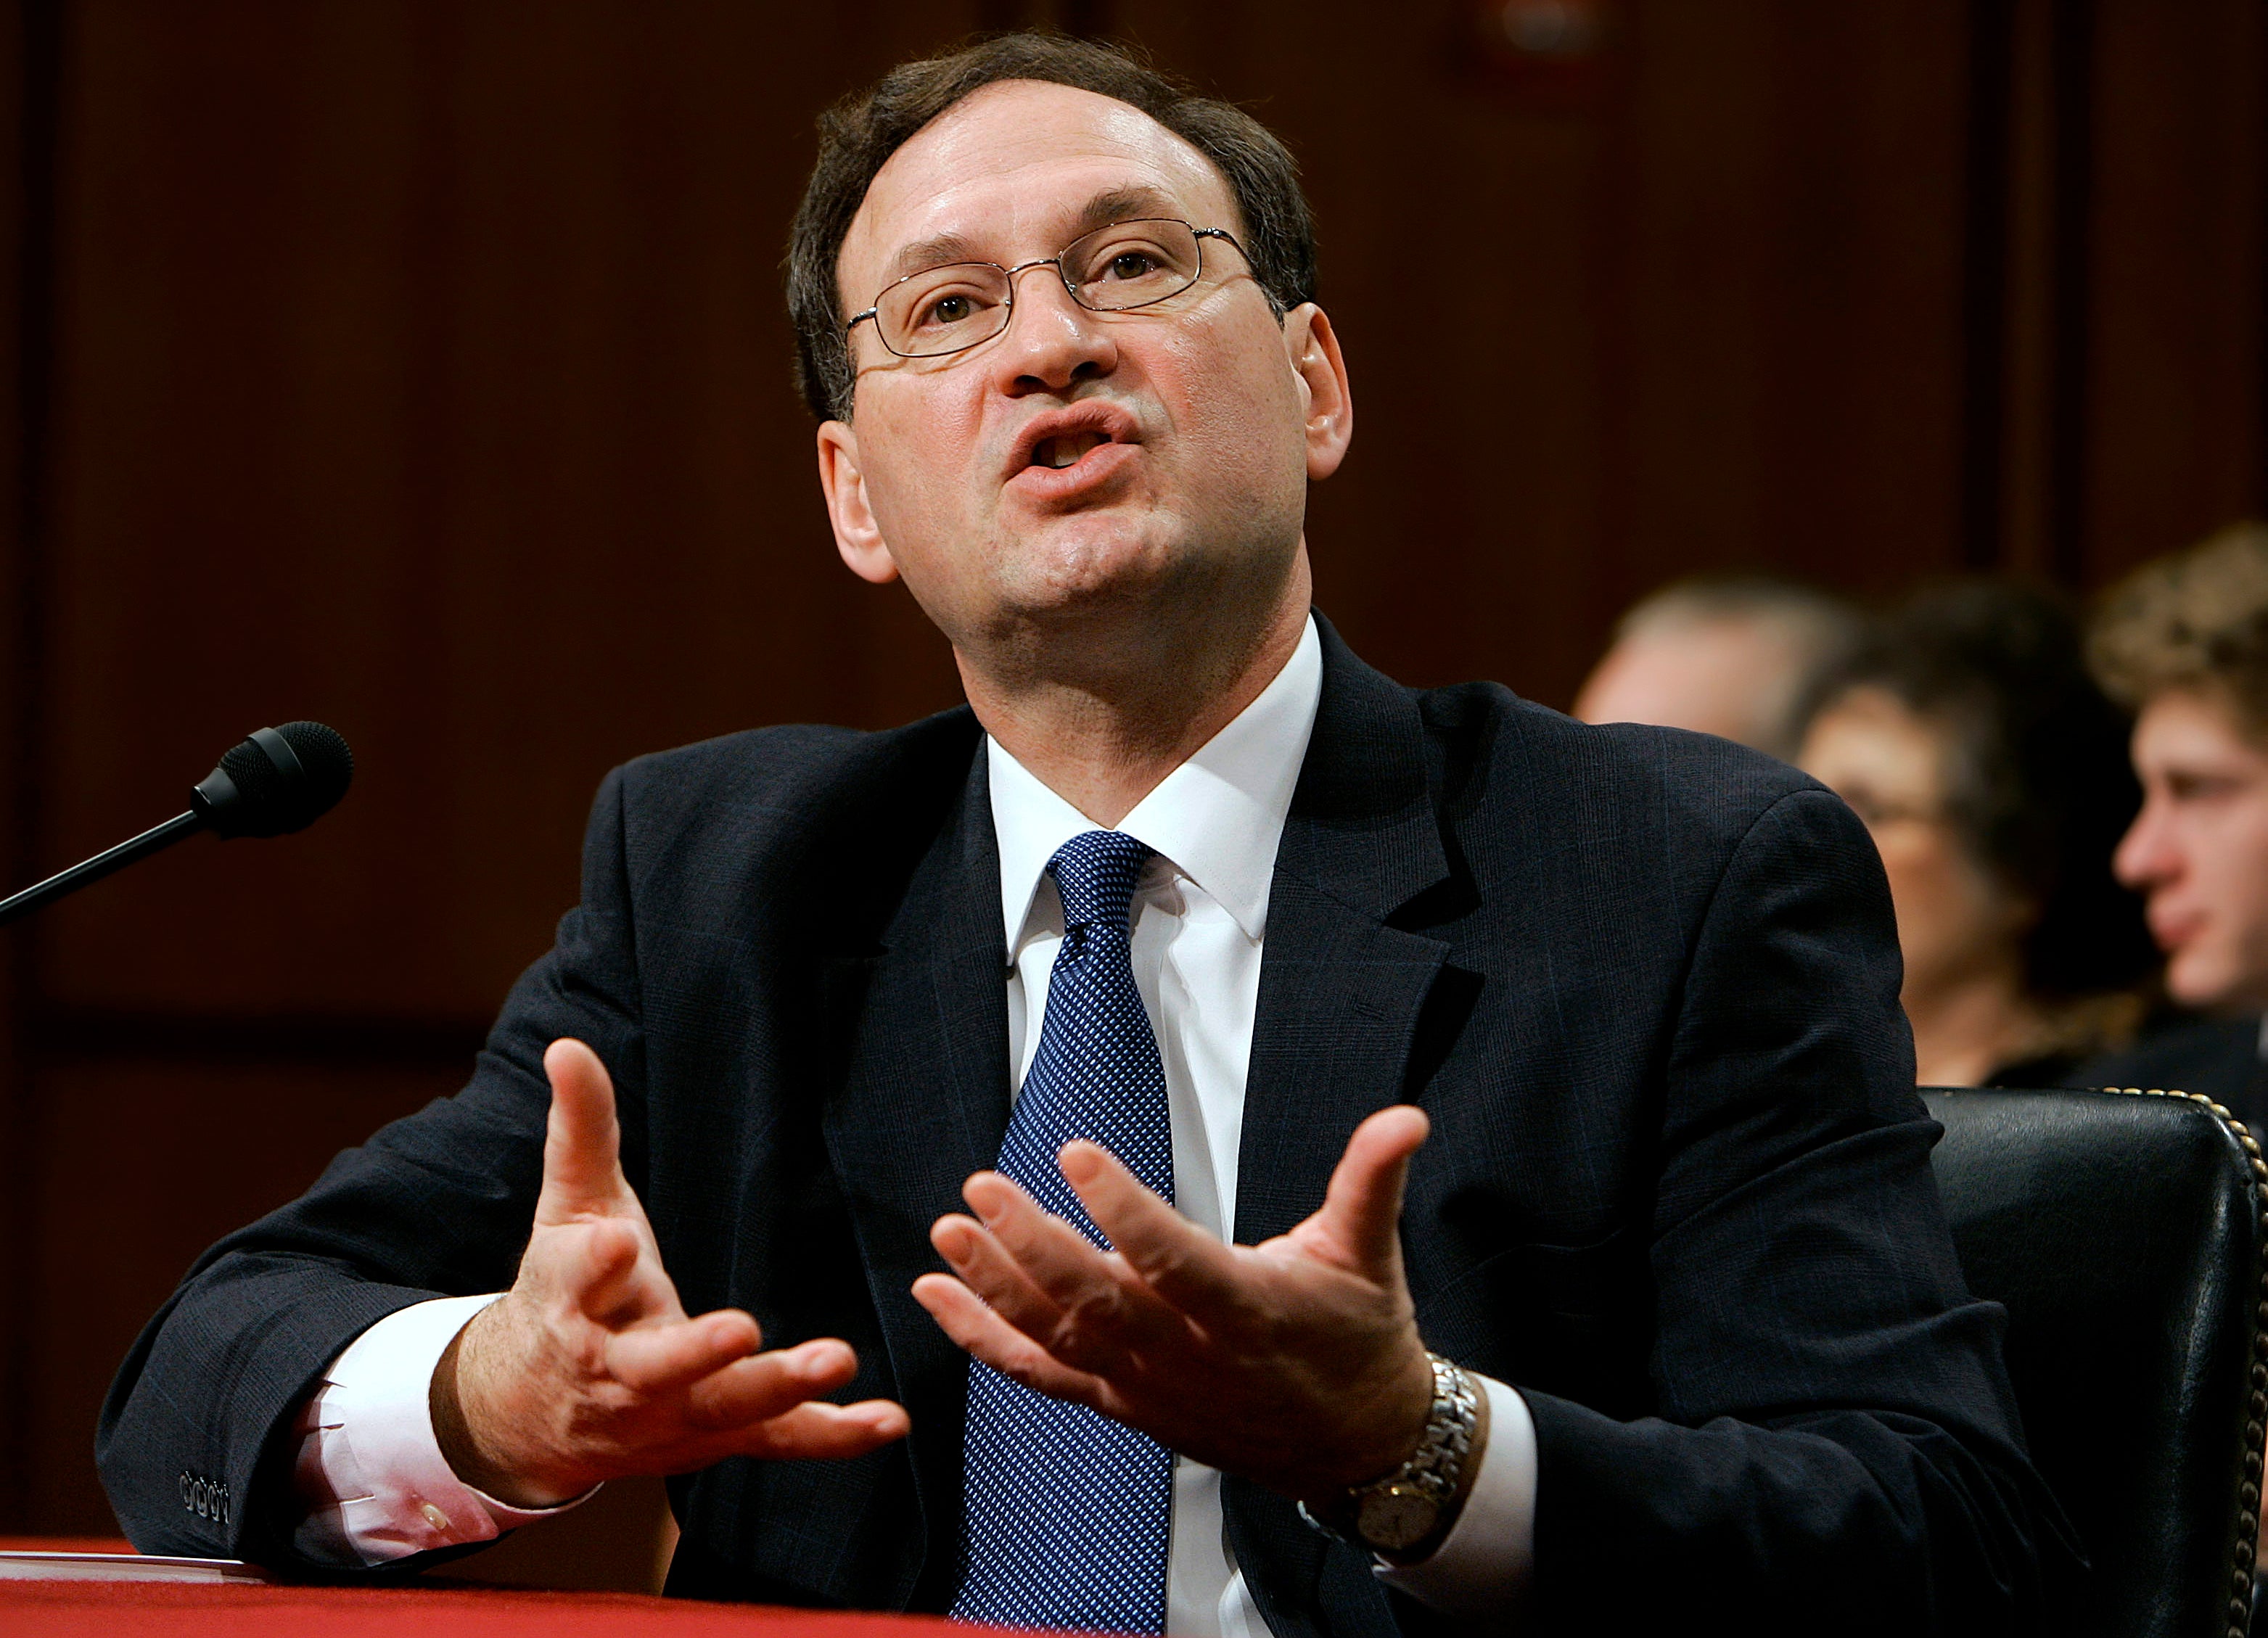 Supreme Court nominee Judge Samuel Alito answers a question on the third day of his confirmation hearings before the Senate Judiciary Committee on Capitol Hill in Washington, Jan. 11, 2006